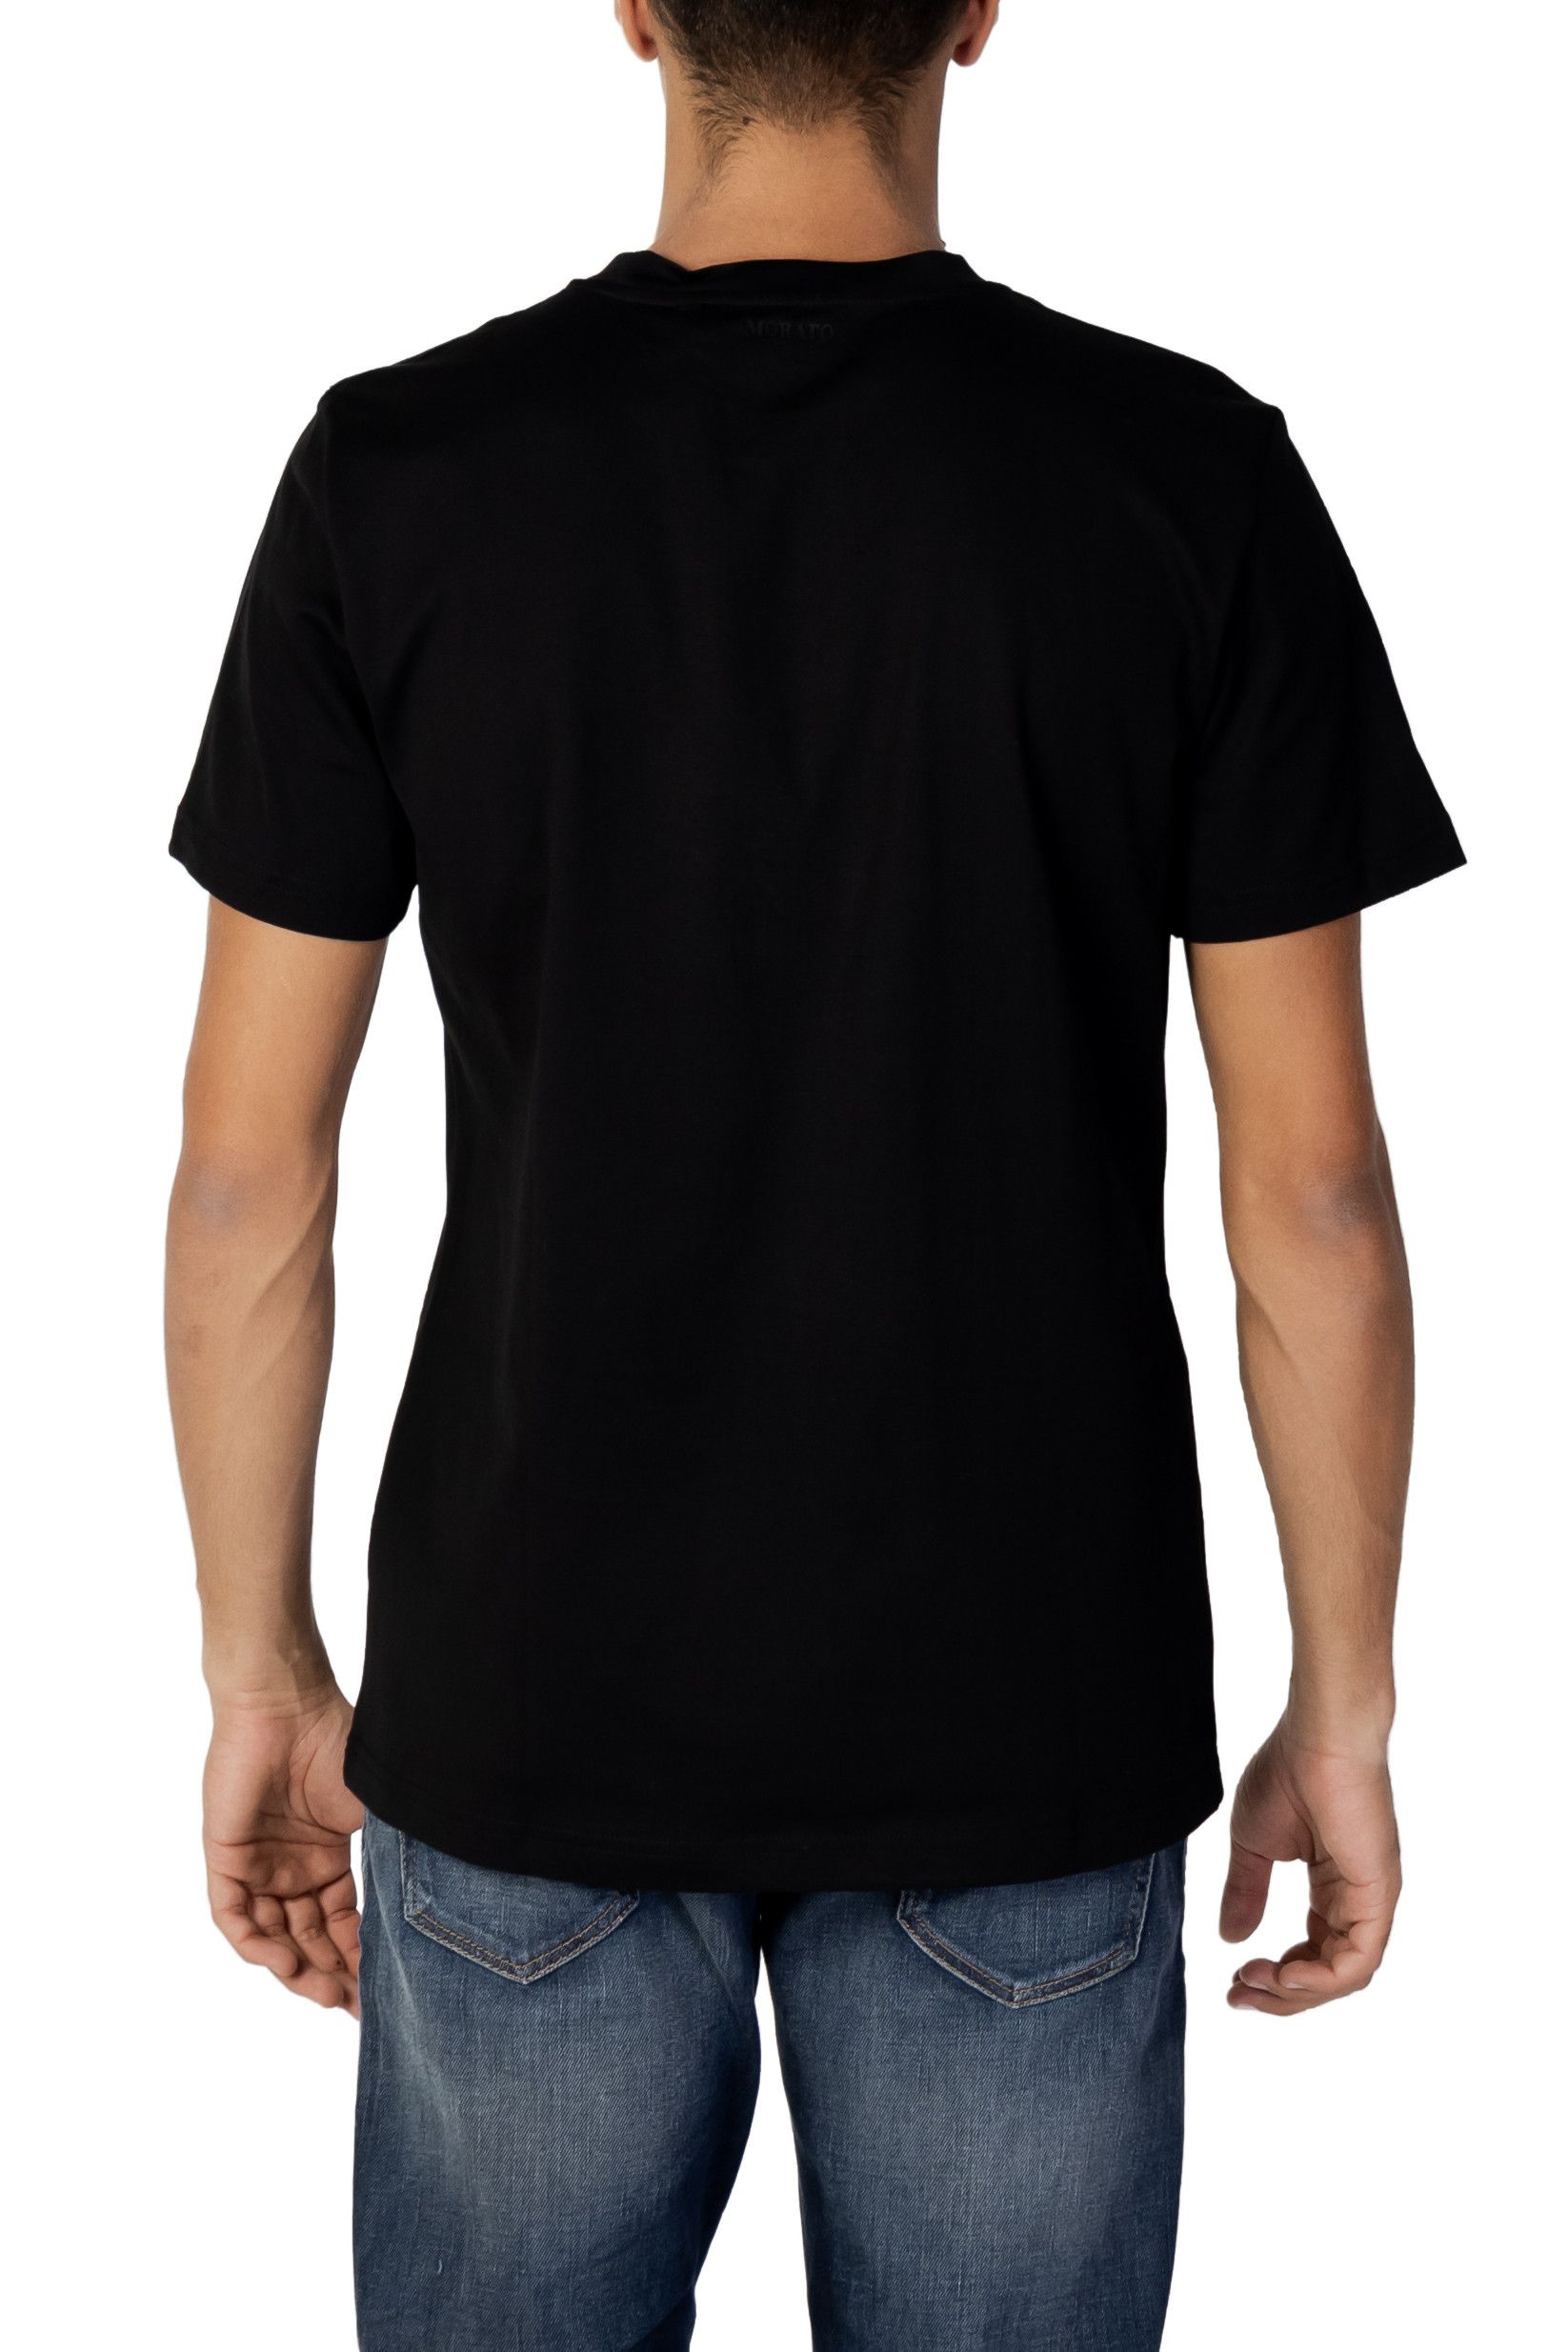 Brand: Antony Morato
Gender: Men
Type: T-shirts
Season: Fall/Winter

PRODUCT DETAIL
• Color: black
• Pattern: print
• Sleeves: short
• Neckline: round neck

COMPOSITION AND MATERIAL
• Composition: -100% cotton 
•  Washing: machine wash at 30°